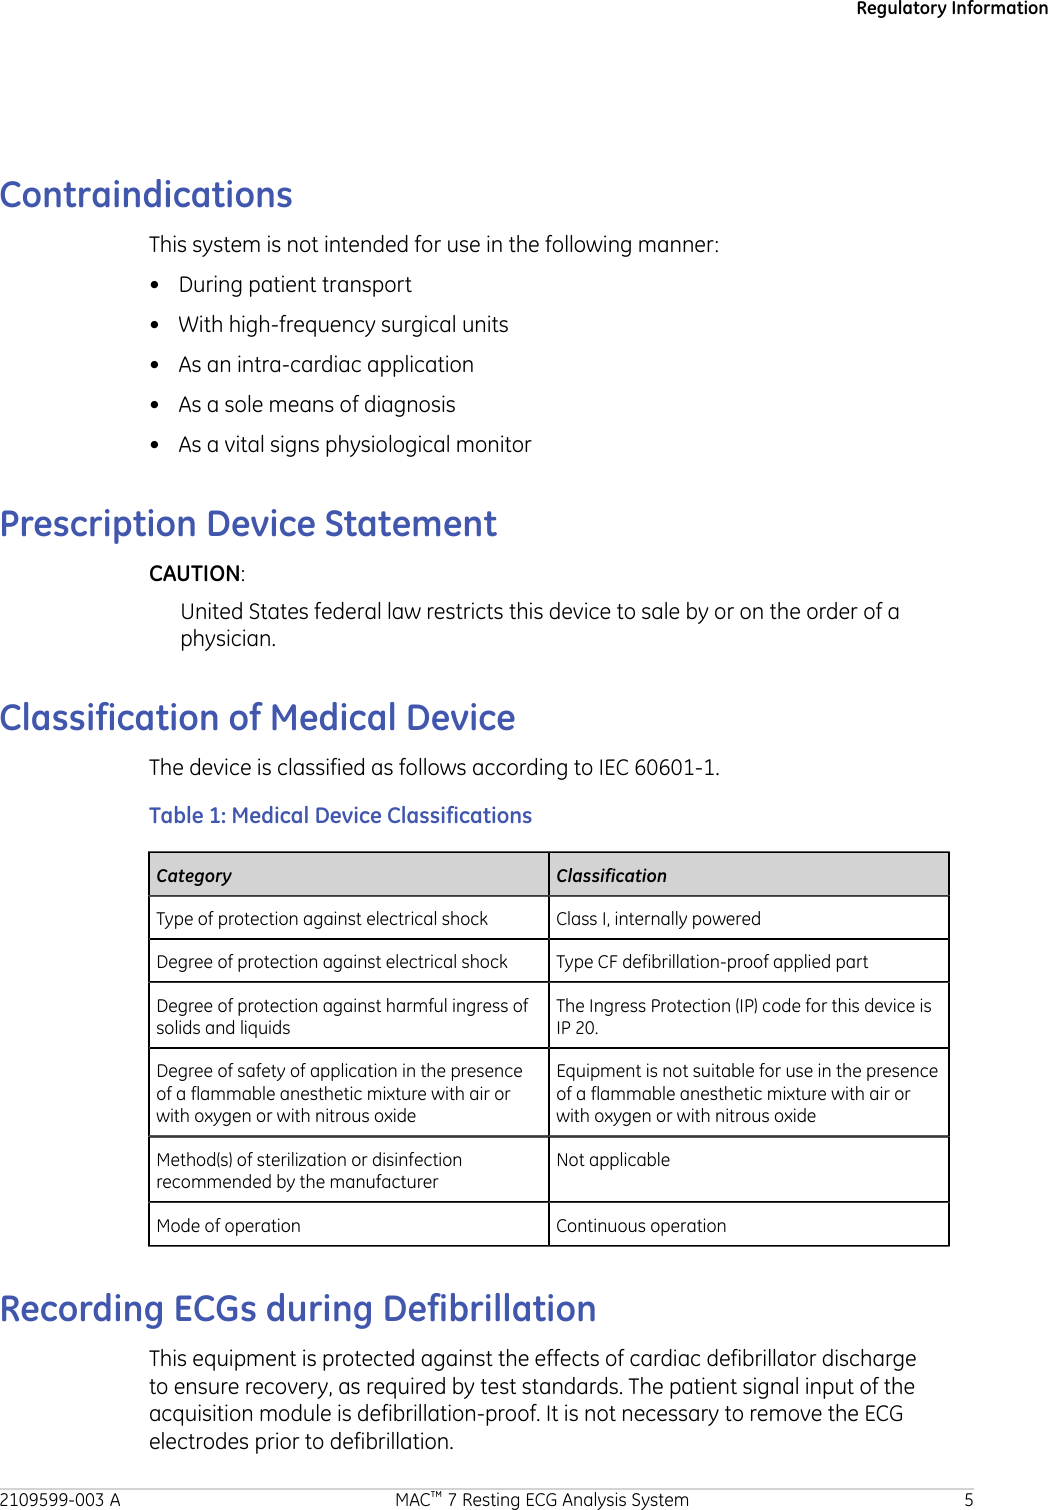 Regulatory InformationContraindicationsThis system is not intended for use in the following manner:• During patient transport• With high-frequency surgical units• As an intra-cardiac application• As a sole means of diagnosis• As a vital signs physiological monitorPrescription Device StatementCAUTION:United States federal law restricts this device to sale by or on the order of aphysician.Classification of Medical DeviceThe device is classified as follows according to IEC 60601-1.Table 1: Medical Device ClassificationsCategory ClassificationType of protection against electrical shock Class I, internally poweredDegree of protection against electrical shock Type CF defibrillation-proof applied partDegree of protection against harmful ingress ofsolids and liquidsThe Ingress Protection (IP) code for this device isIP 20.Degree of safety of application in the presenceof a flammable anesthetic mixture with air orwith oxygen or with nitrous oxideEquipment is not suitable for use in the presenceof a flammable anesthetic mixture with air orwith oxygen or with nitrous oxideMethod(s) of sterilization or disinfectionrecommended by the manufacturerNot applicableMode of operation Continuous operationRecording ECGs during DefibrillationThis equipment is protected against the effects of cardiac defibrillator dischargeto ensure recovery, as required by test standards. The patient signal input of theacquisition module is defibrillation-proof. It is not necessary to remove the ECGelectrodes prior to defibrillation.2109599-003 A MAC™ 7 Resting ECG Analysis System 5